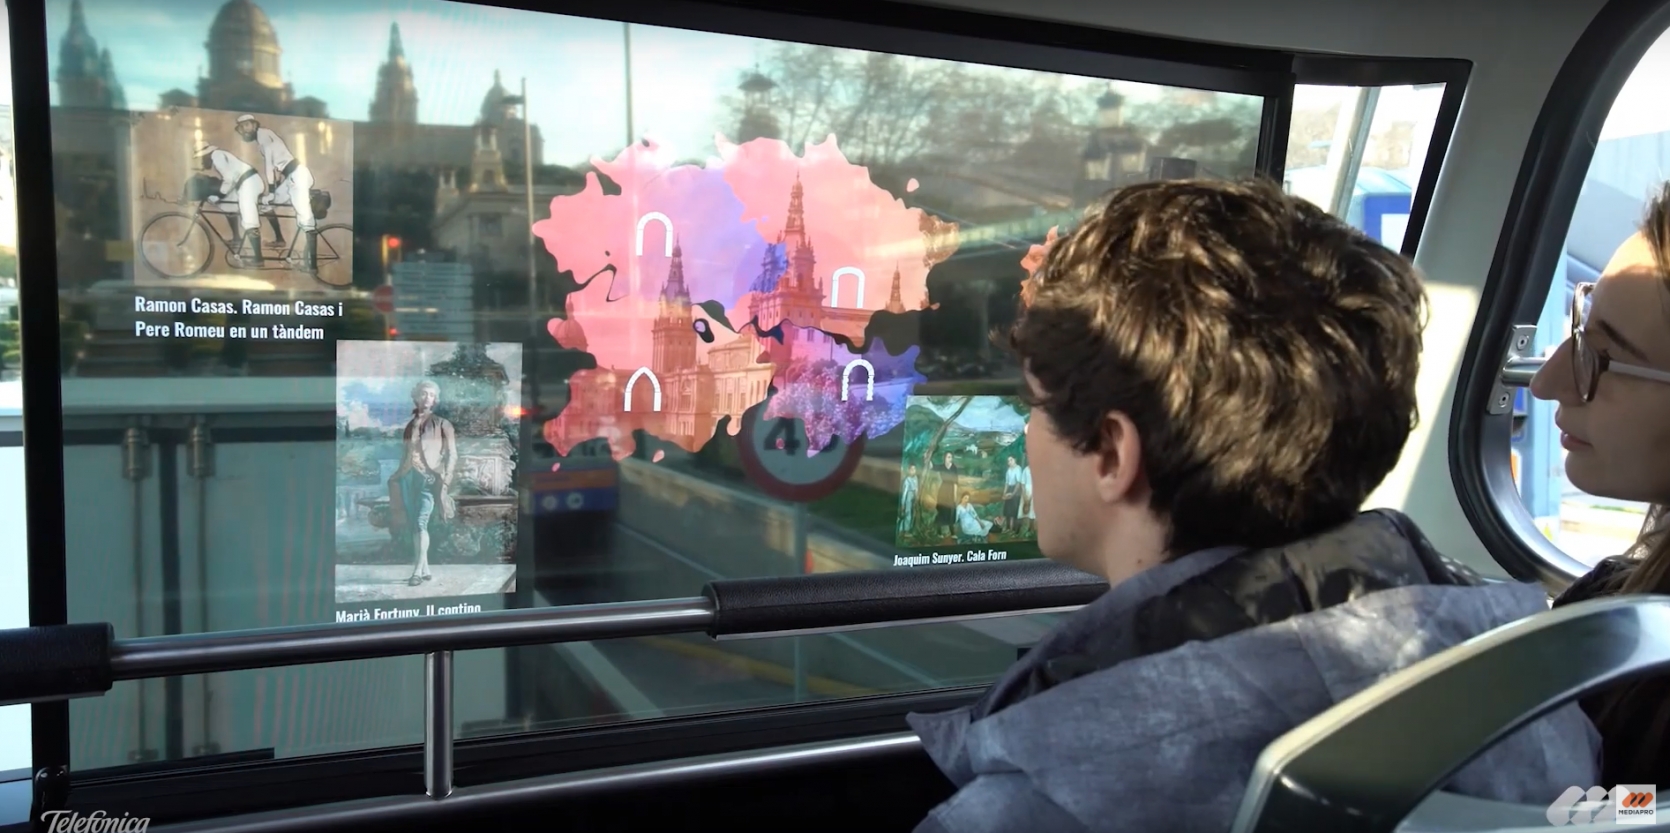 TELEFONICA AND MEDIAPRO DEBUT 5G AUGMENTED TOURISM WITH AR BUS WINDOWS